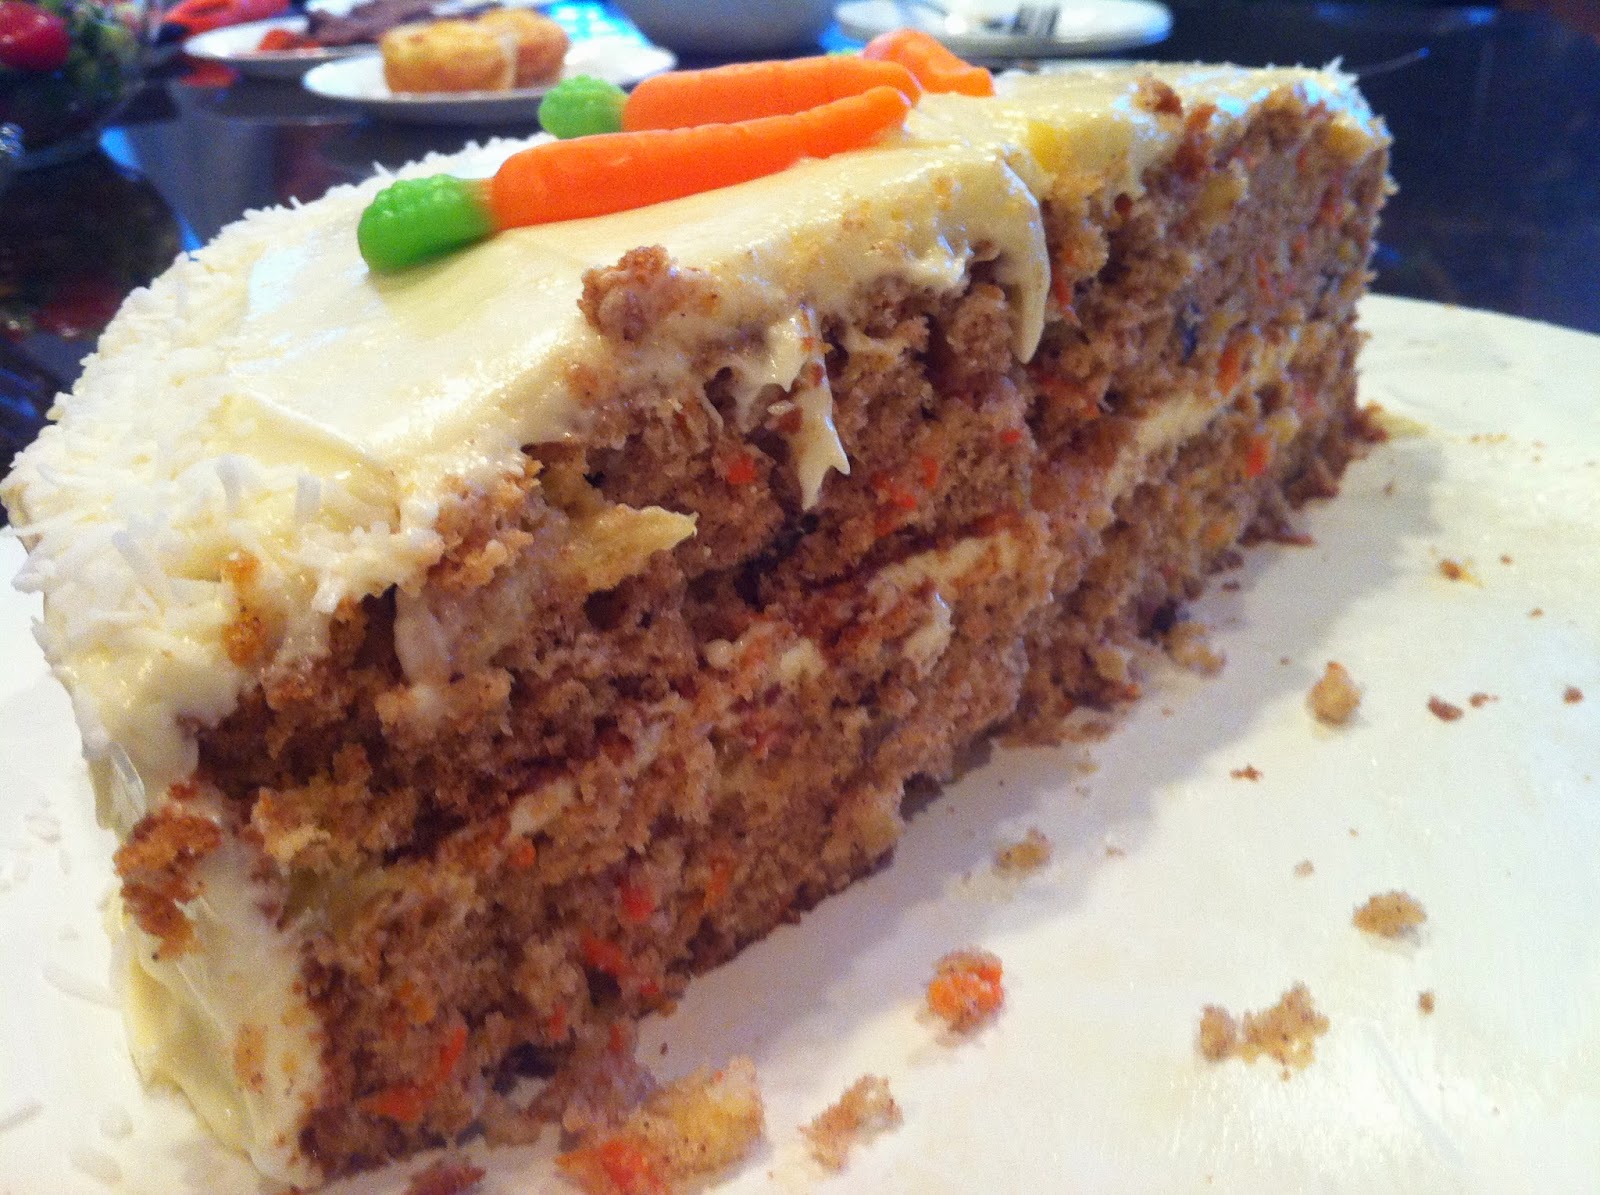 Life Happens: The BEST Ever Carrot Cake